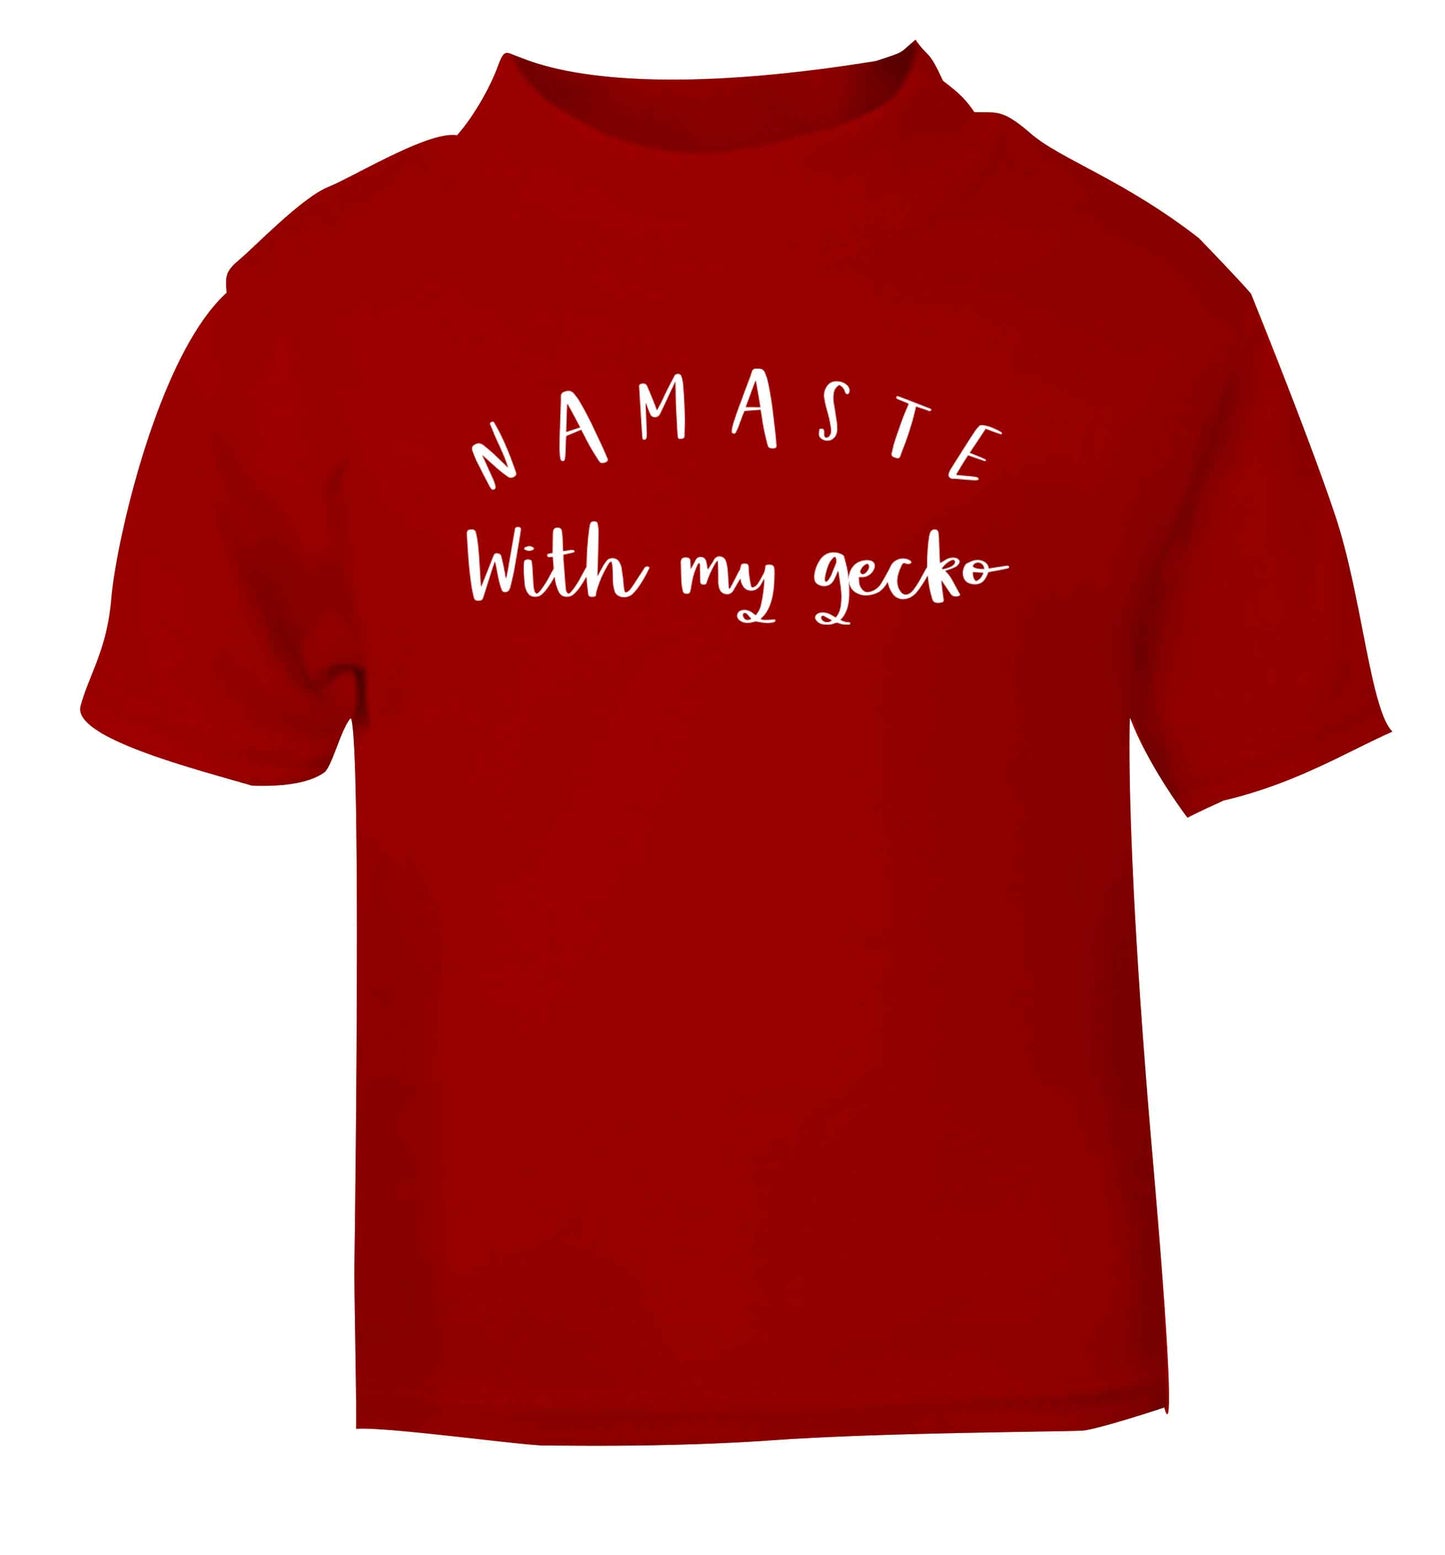 Namaste with my gecko red Baby Toddler Tshirt 2 Years